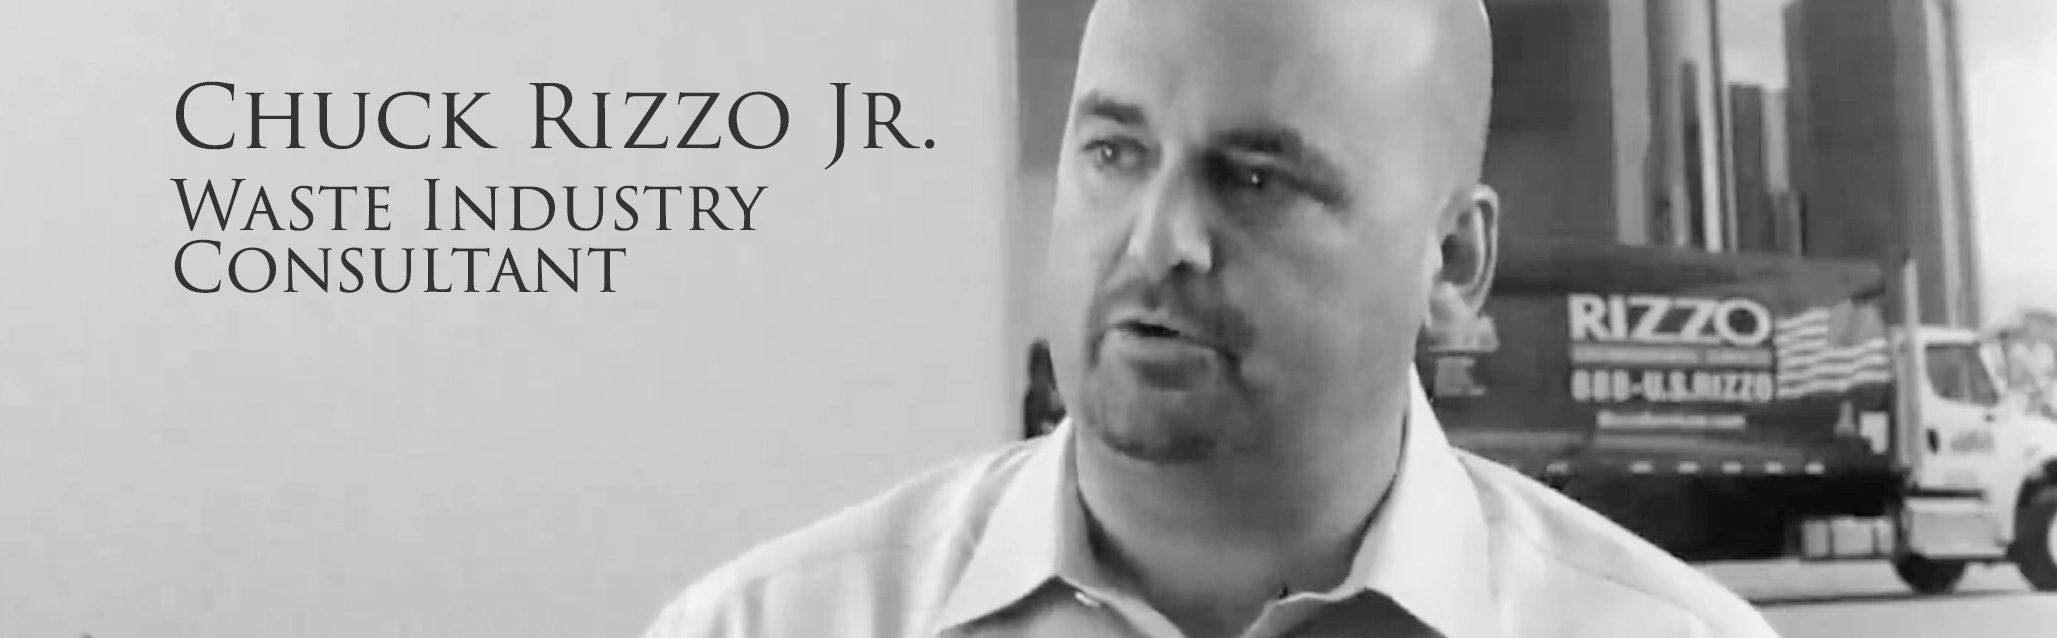 Chuck Rizzo Jr. Waste & Recycling Industry Consulant - from Detroit, to Florida, and to the Nation.